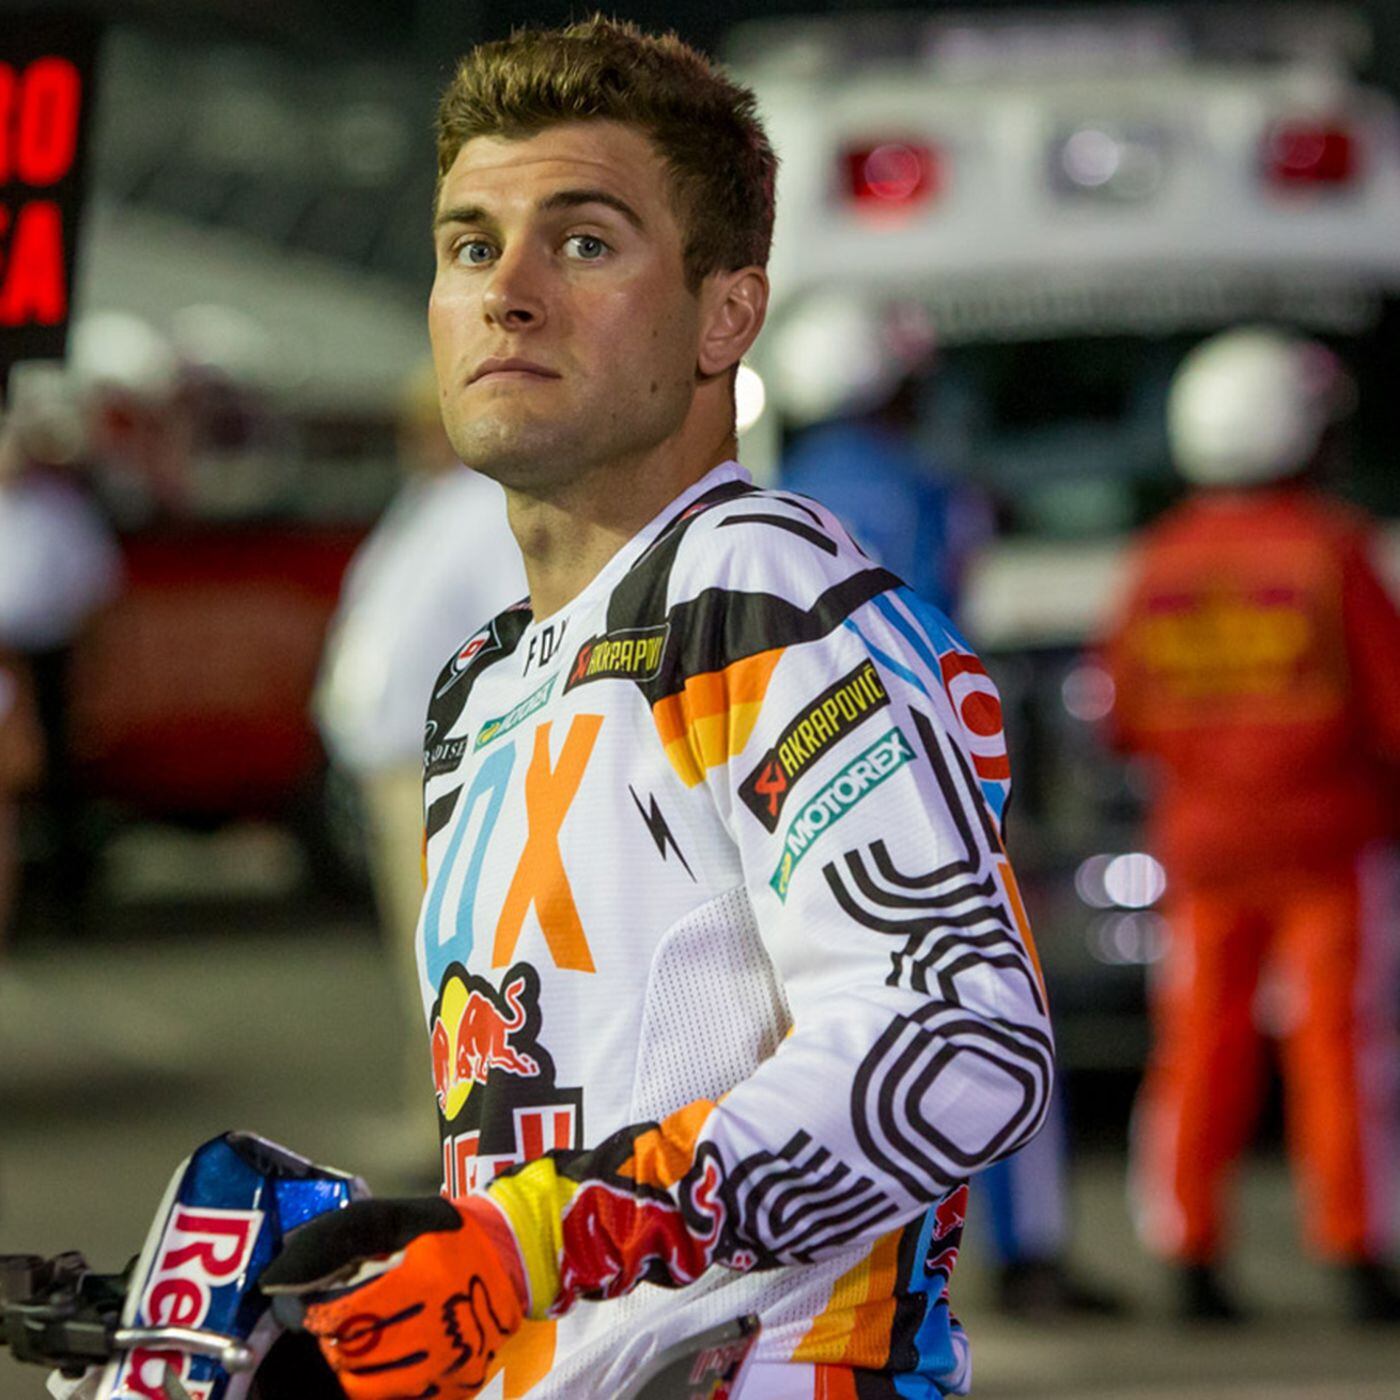 Ryan Dungey Used And Signed Jersey